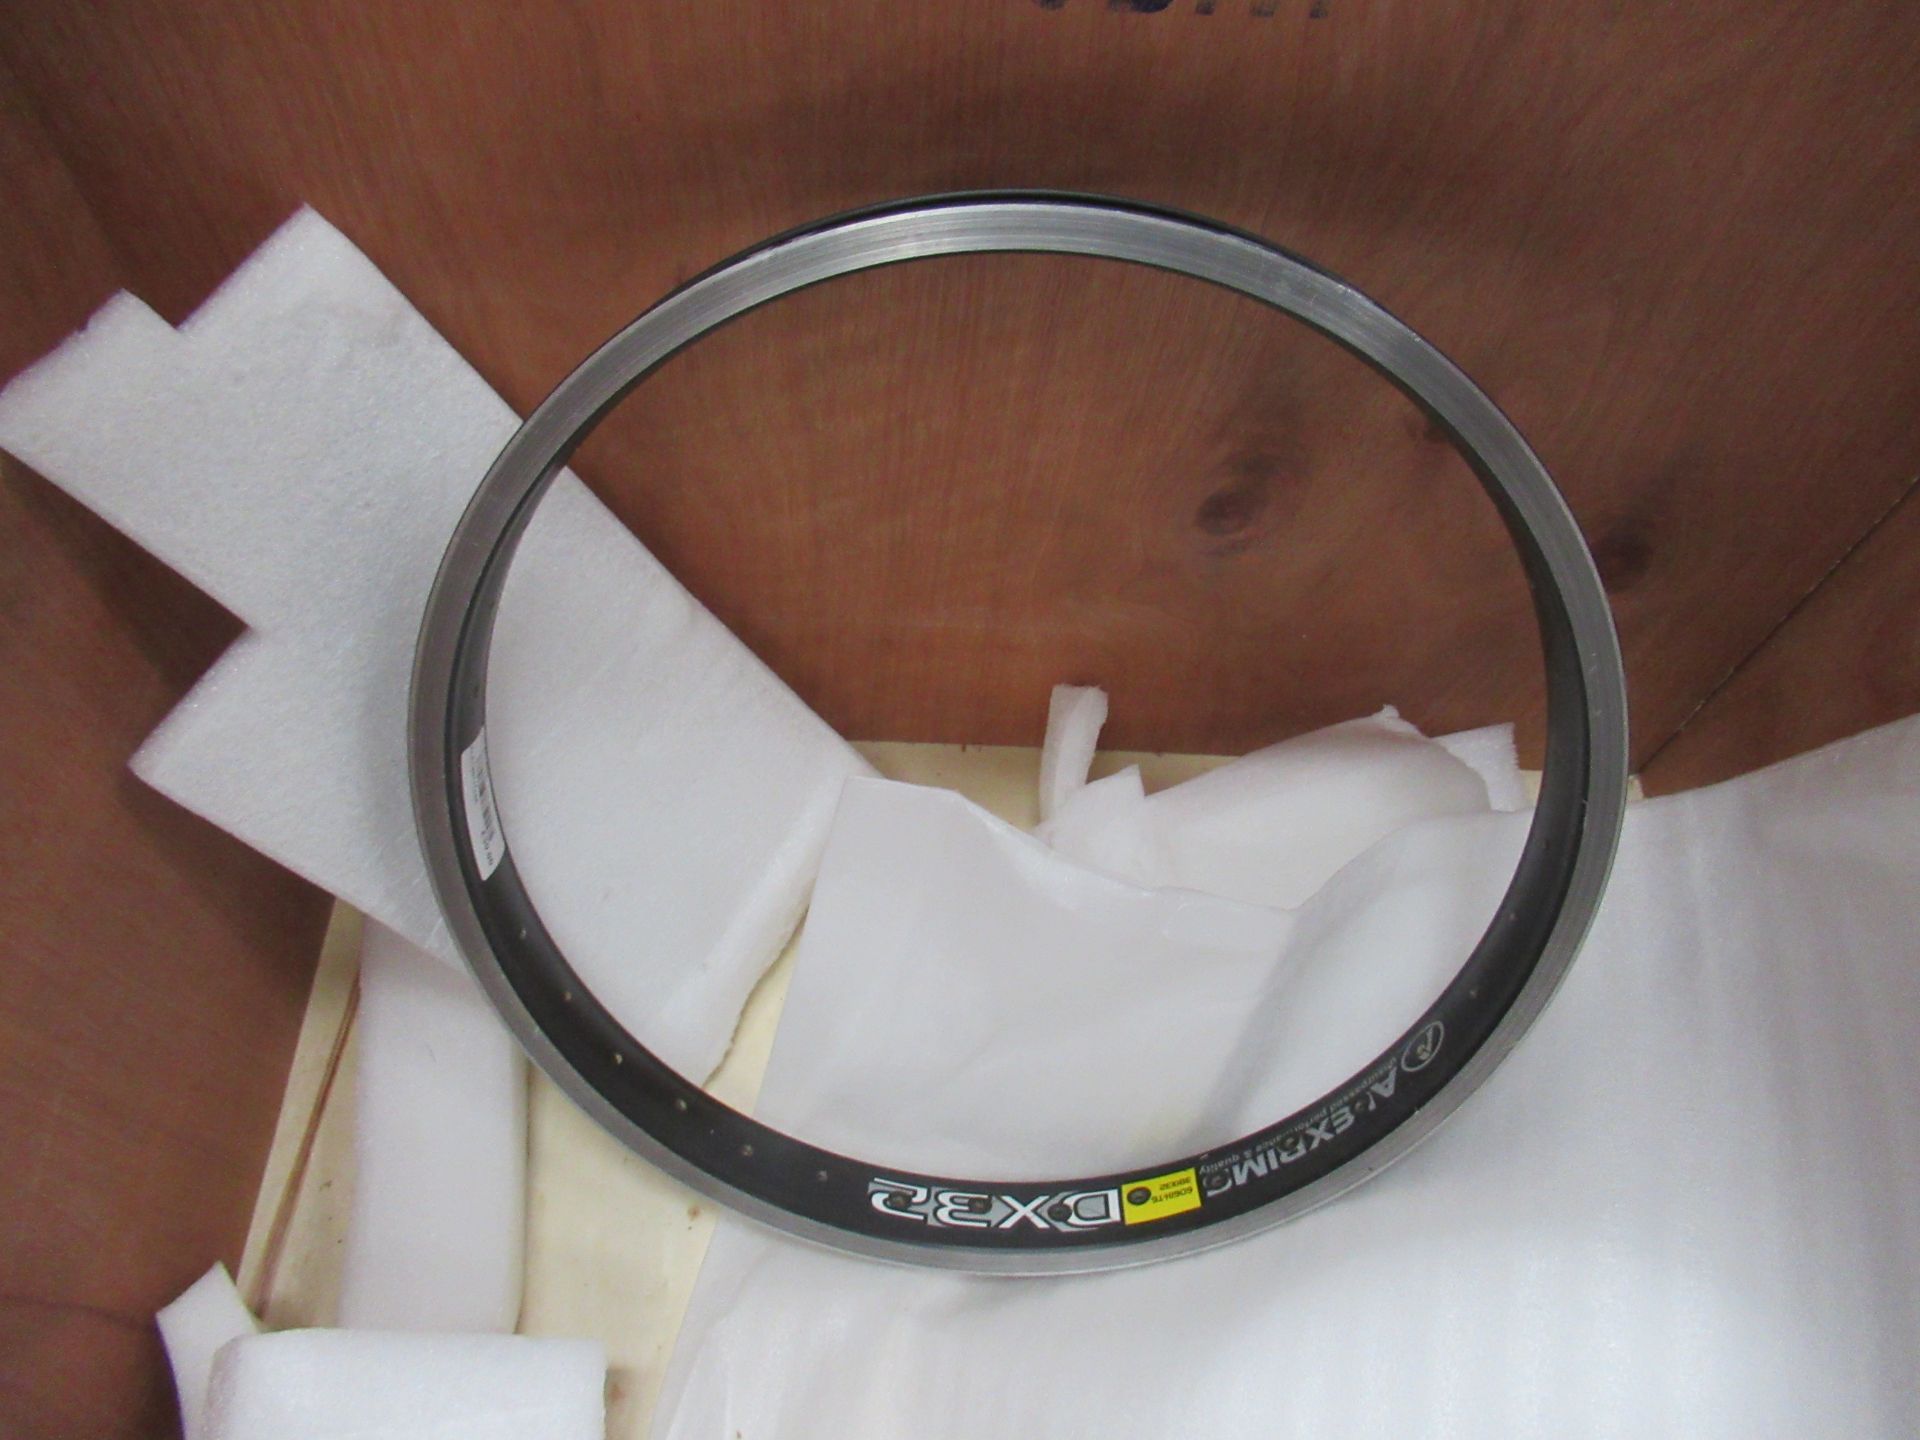 3 x pairs of alloy rims together 2 x BMX rims - 1 x BoxOne; 1 x Alex Rims - (total approx RRP350) - Image 3 of 8